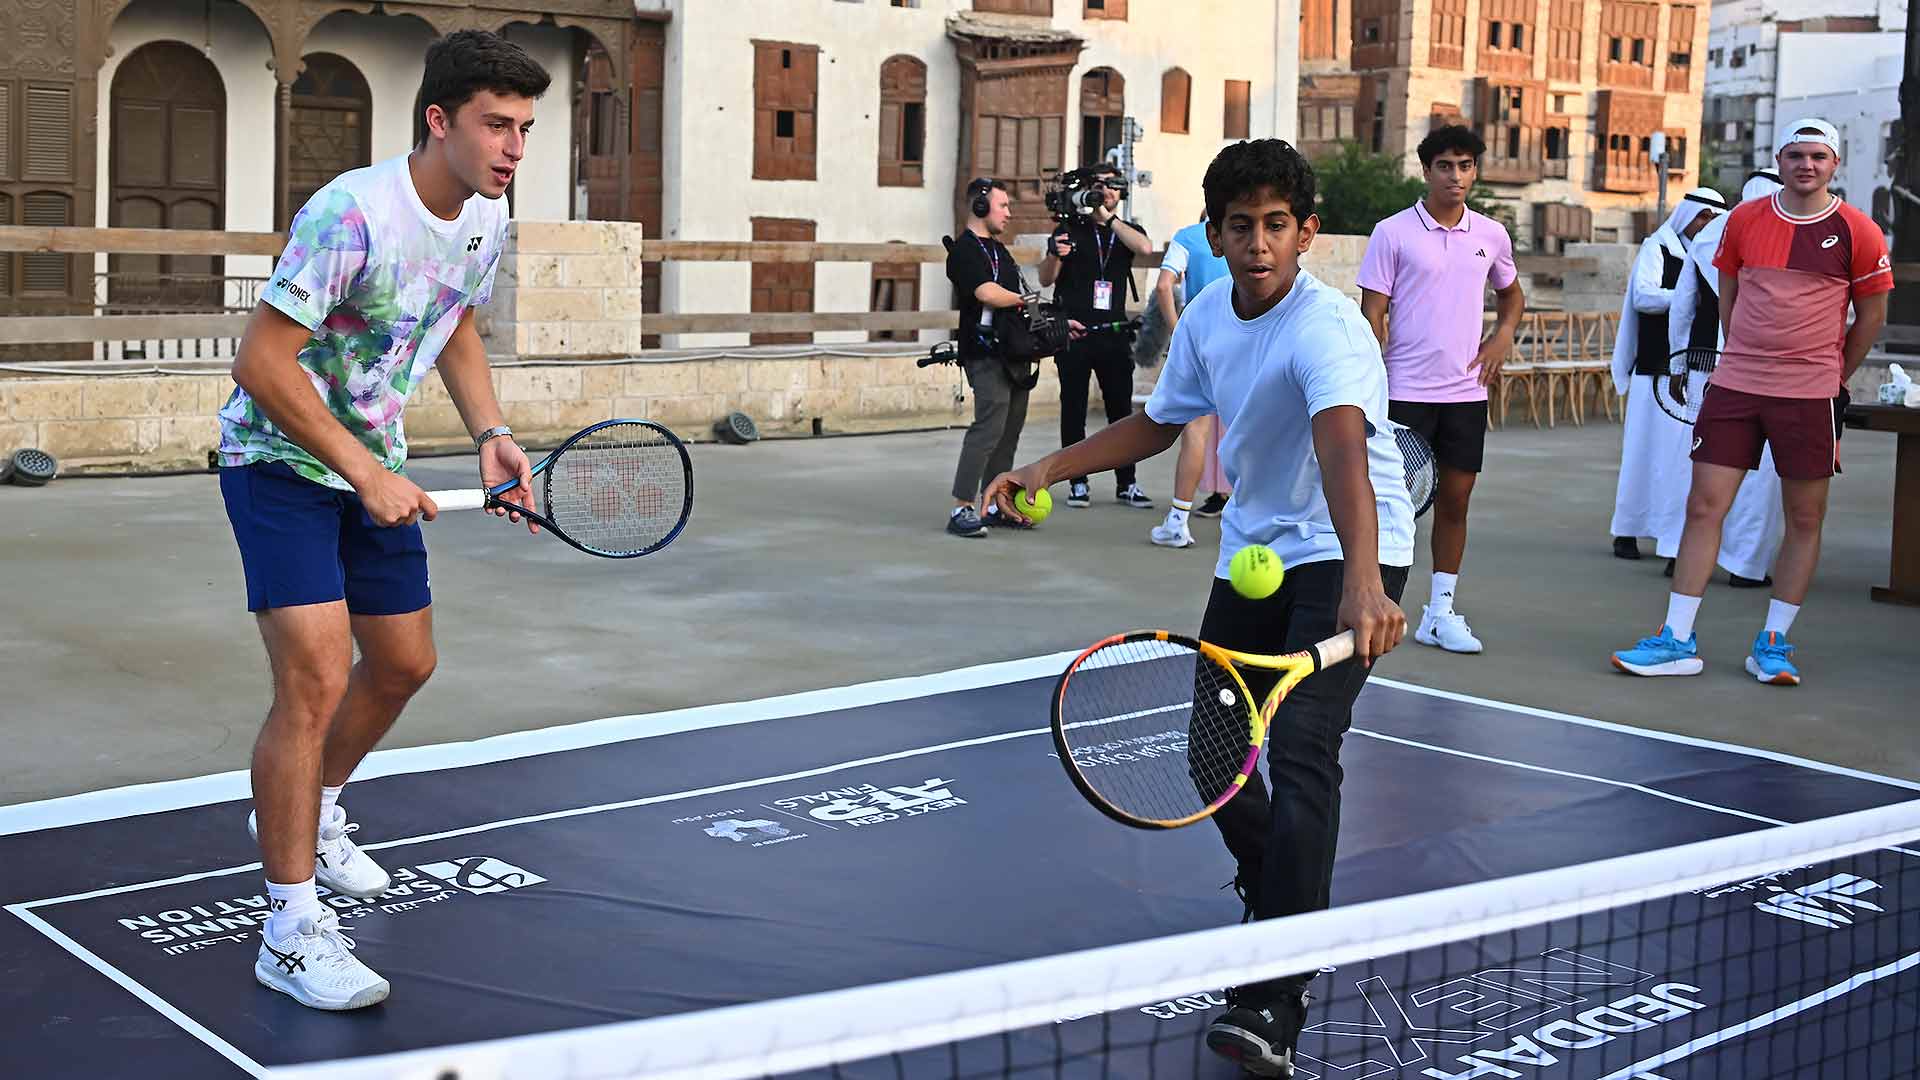 Luca Nardi teams up with a junior Jeddah tennis player during a pre-tournament visit to Al-Balad.